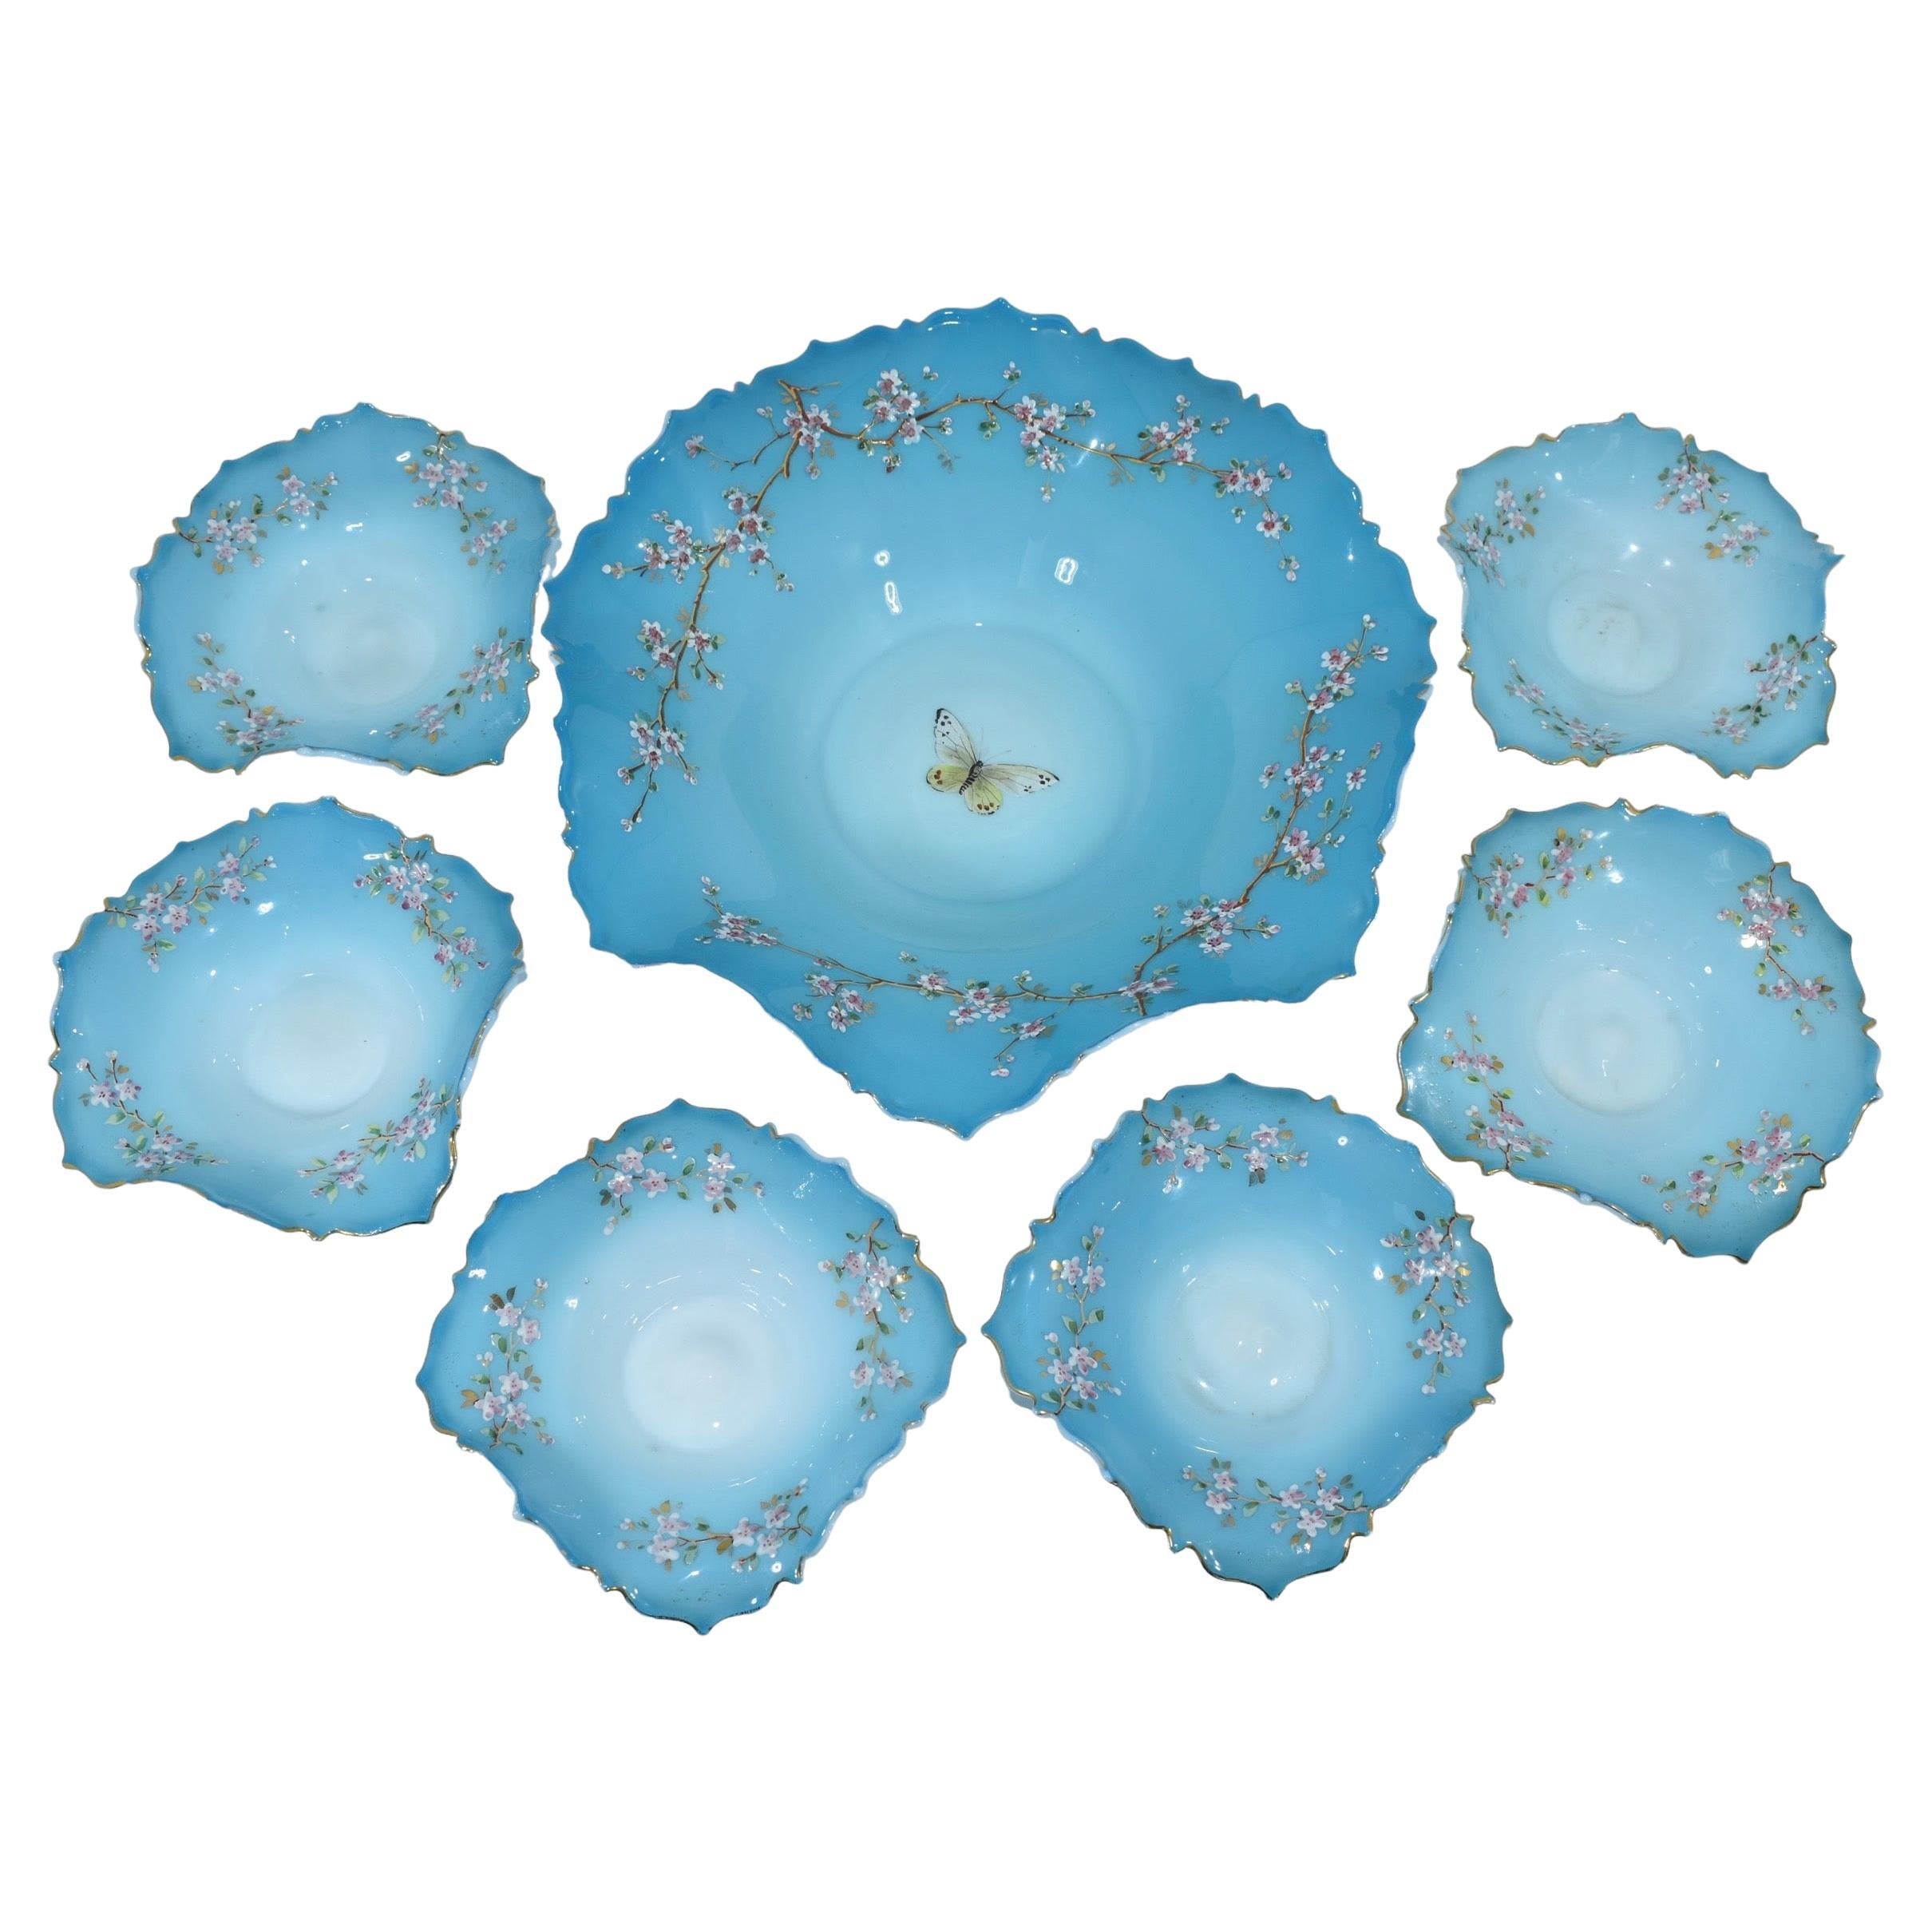 Antique Set of French Turquoise Opaline Glass Plates, 19th Centurz